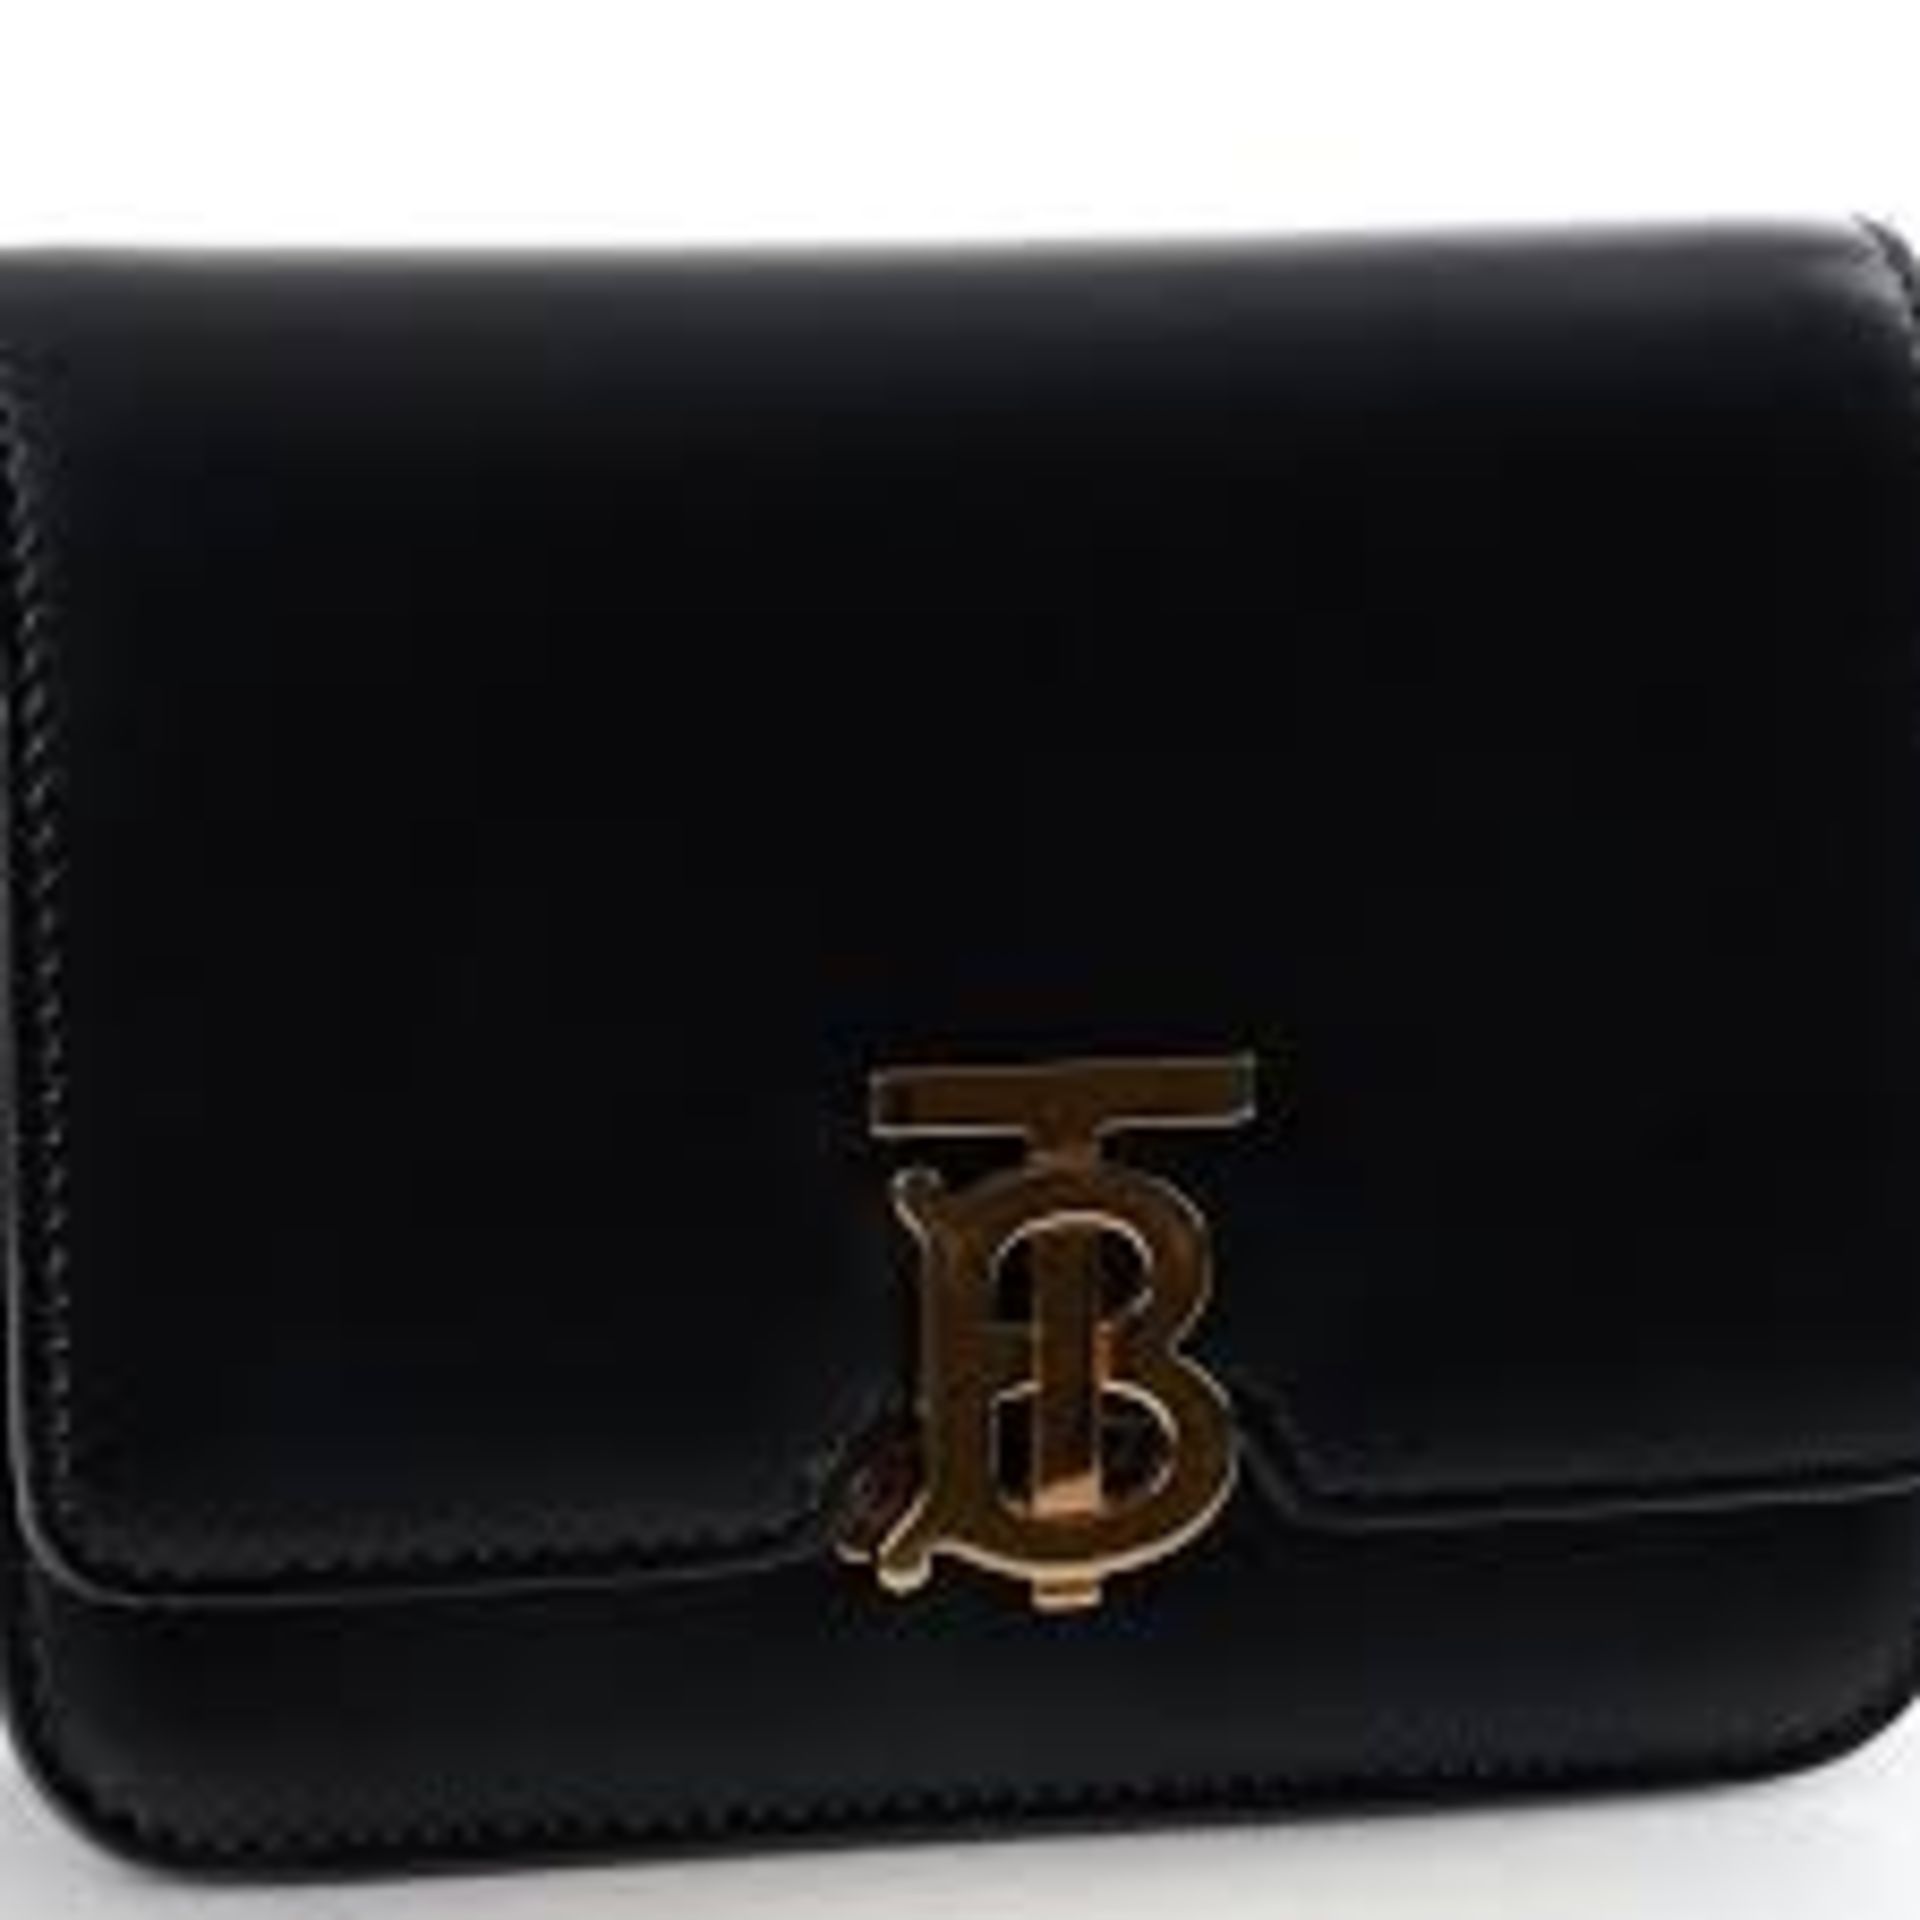 Burberry TB Belt Bag in Black. 17x14cm. (does not include strap) - Image 2 of 11